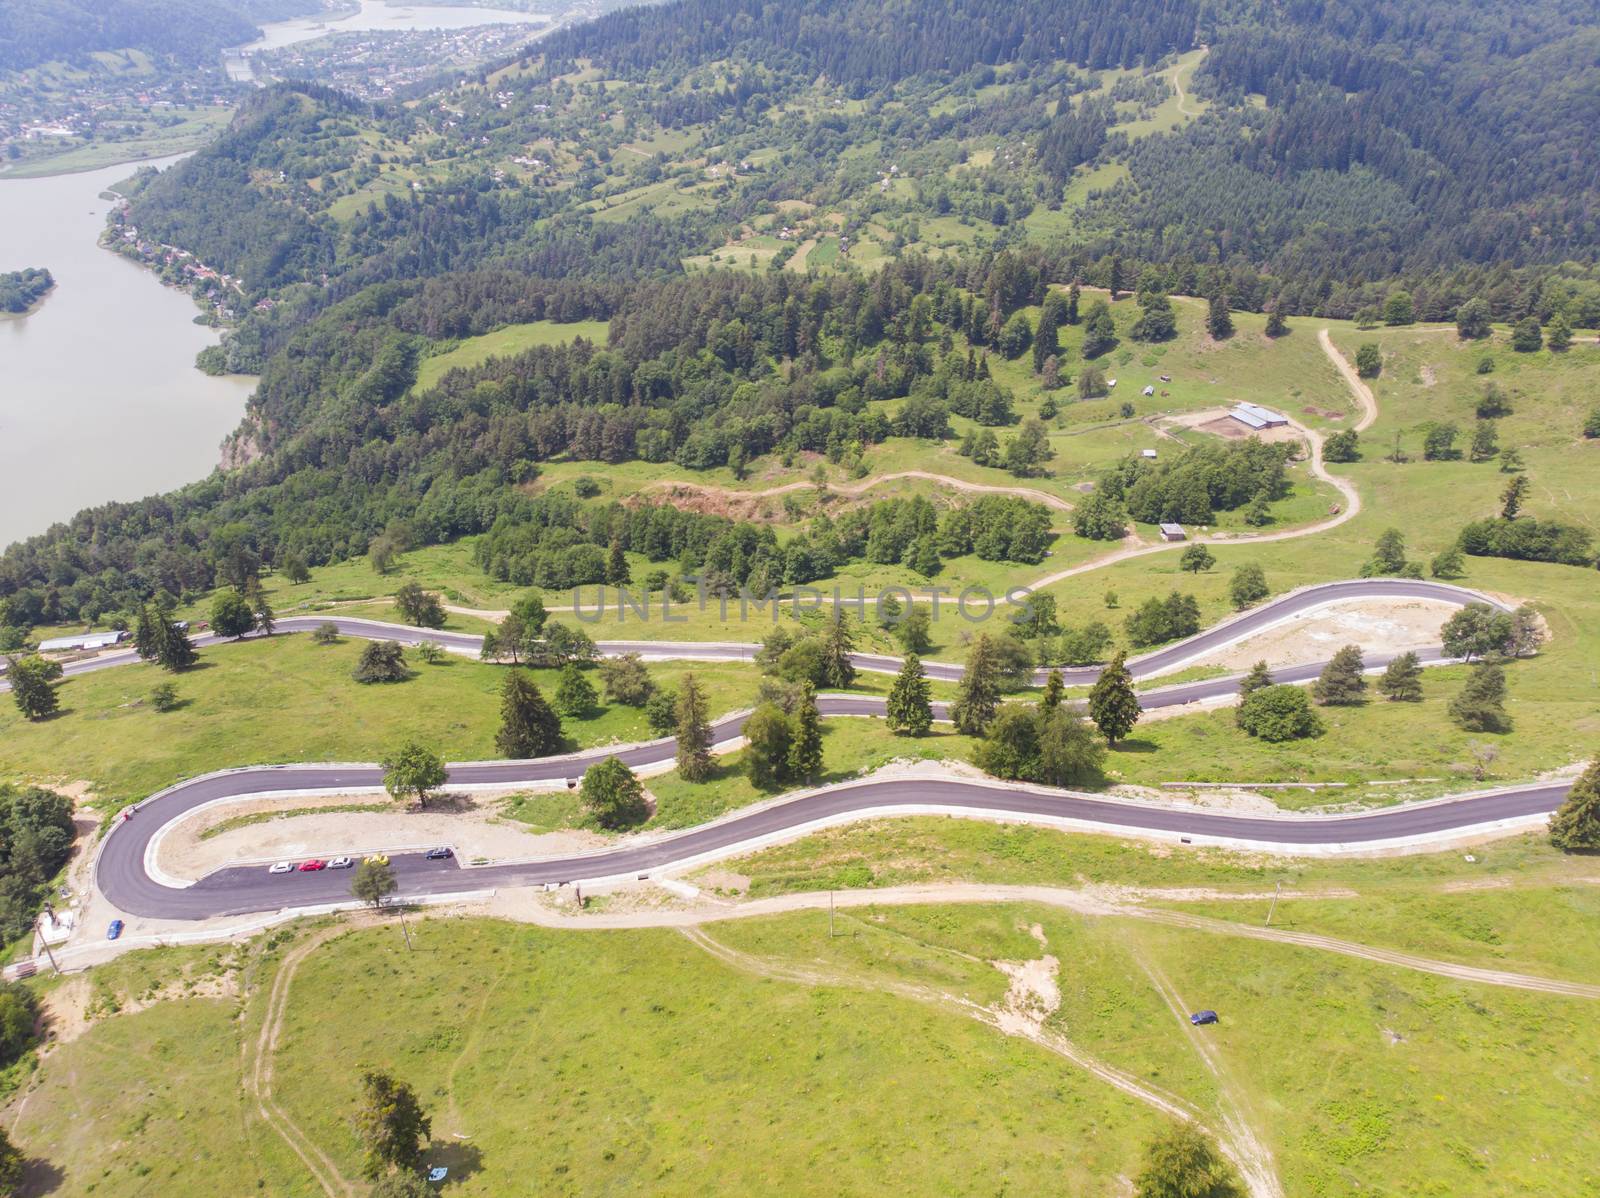 Aerial view of curvy road on mountain